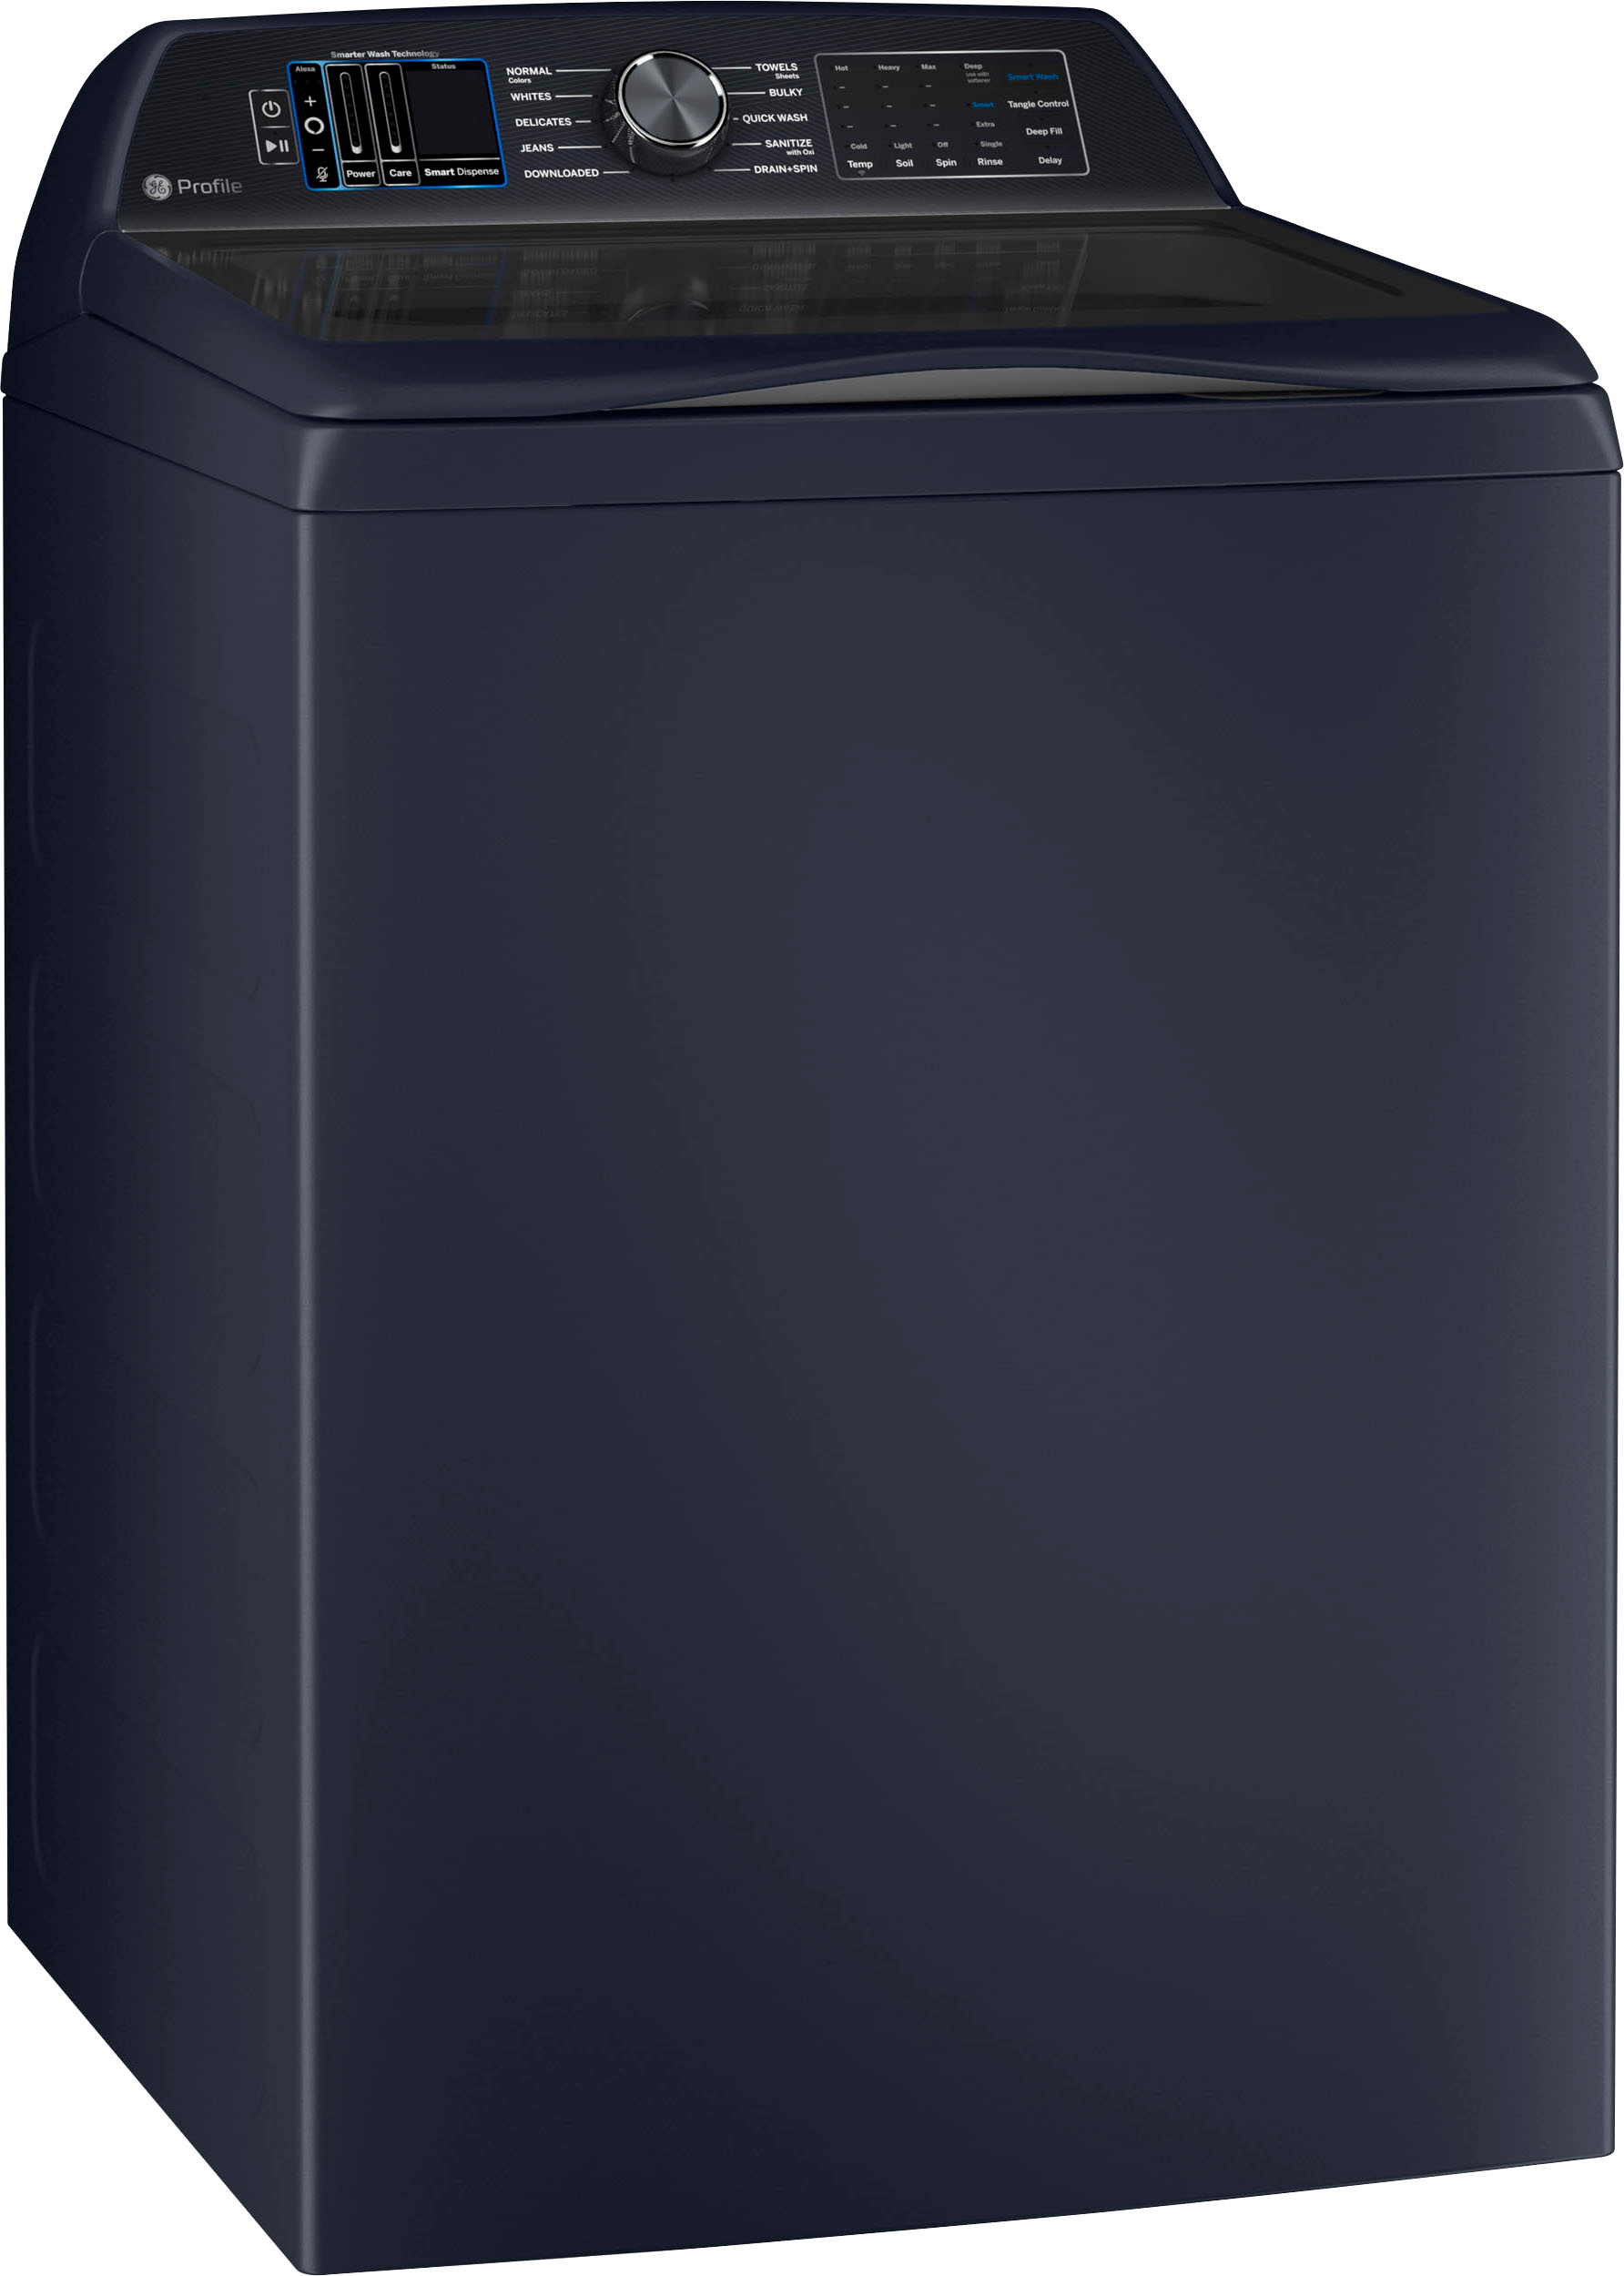 Angle View: Samsung - 4.9 cu. ft. Large Capacity Top Load Washer with ActiveWave Agitator and Deep Fill - Black